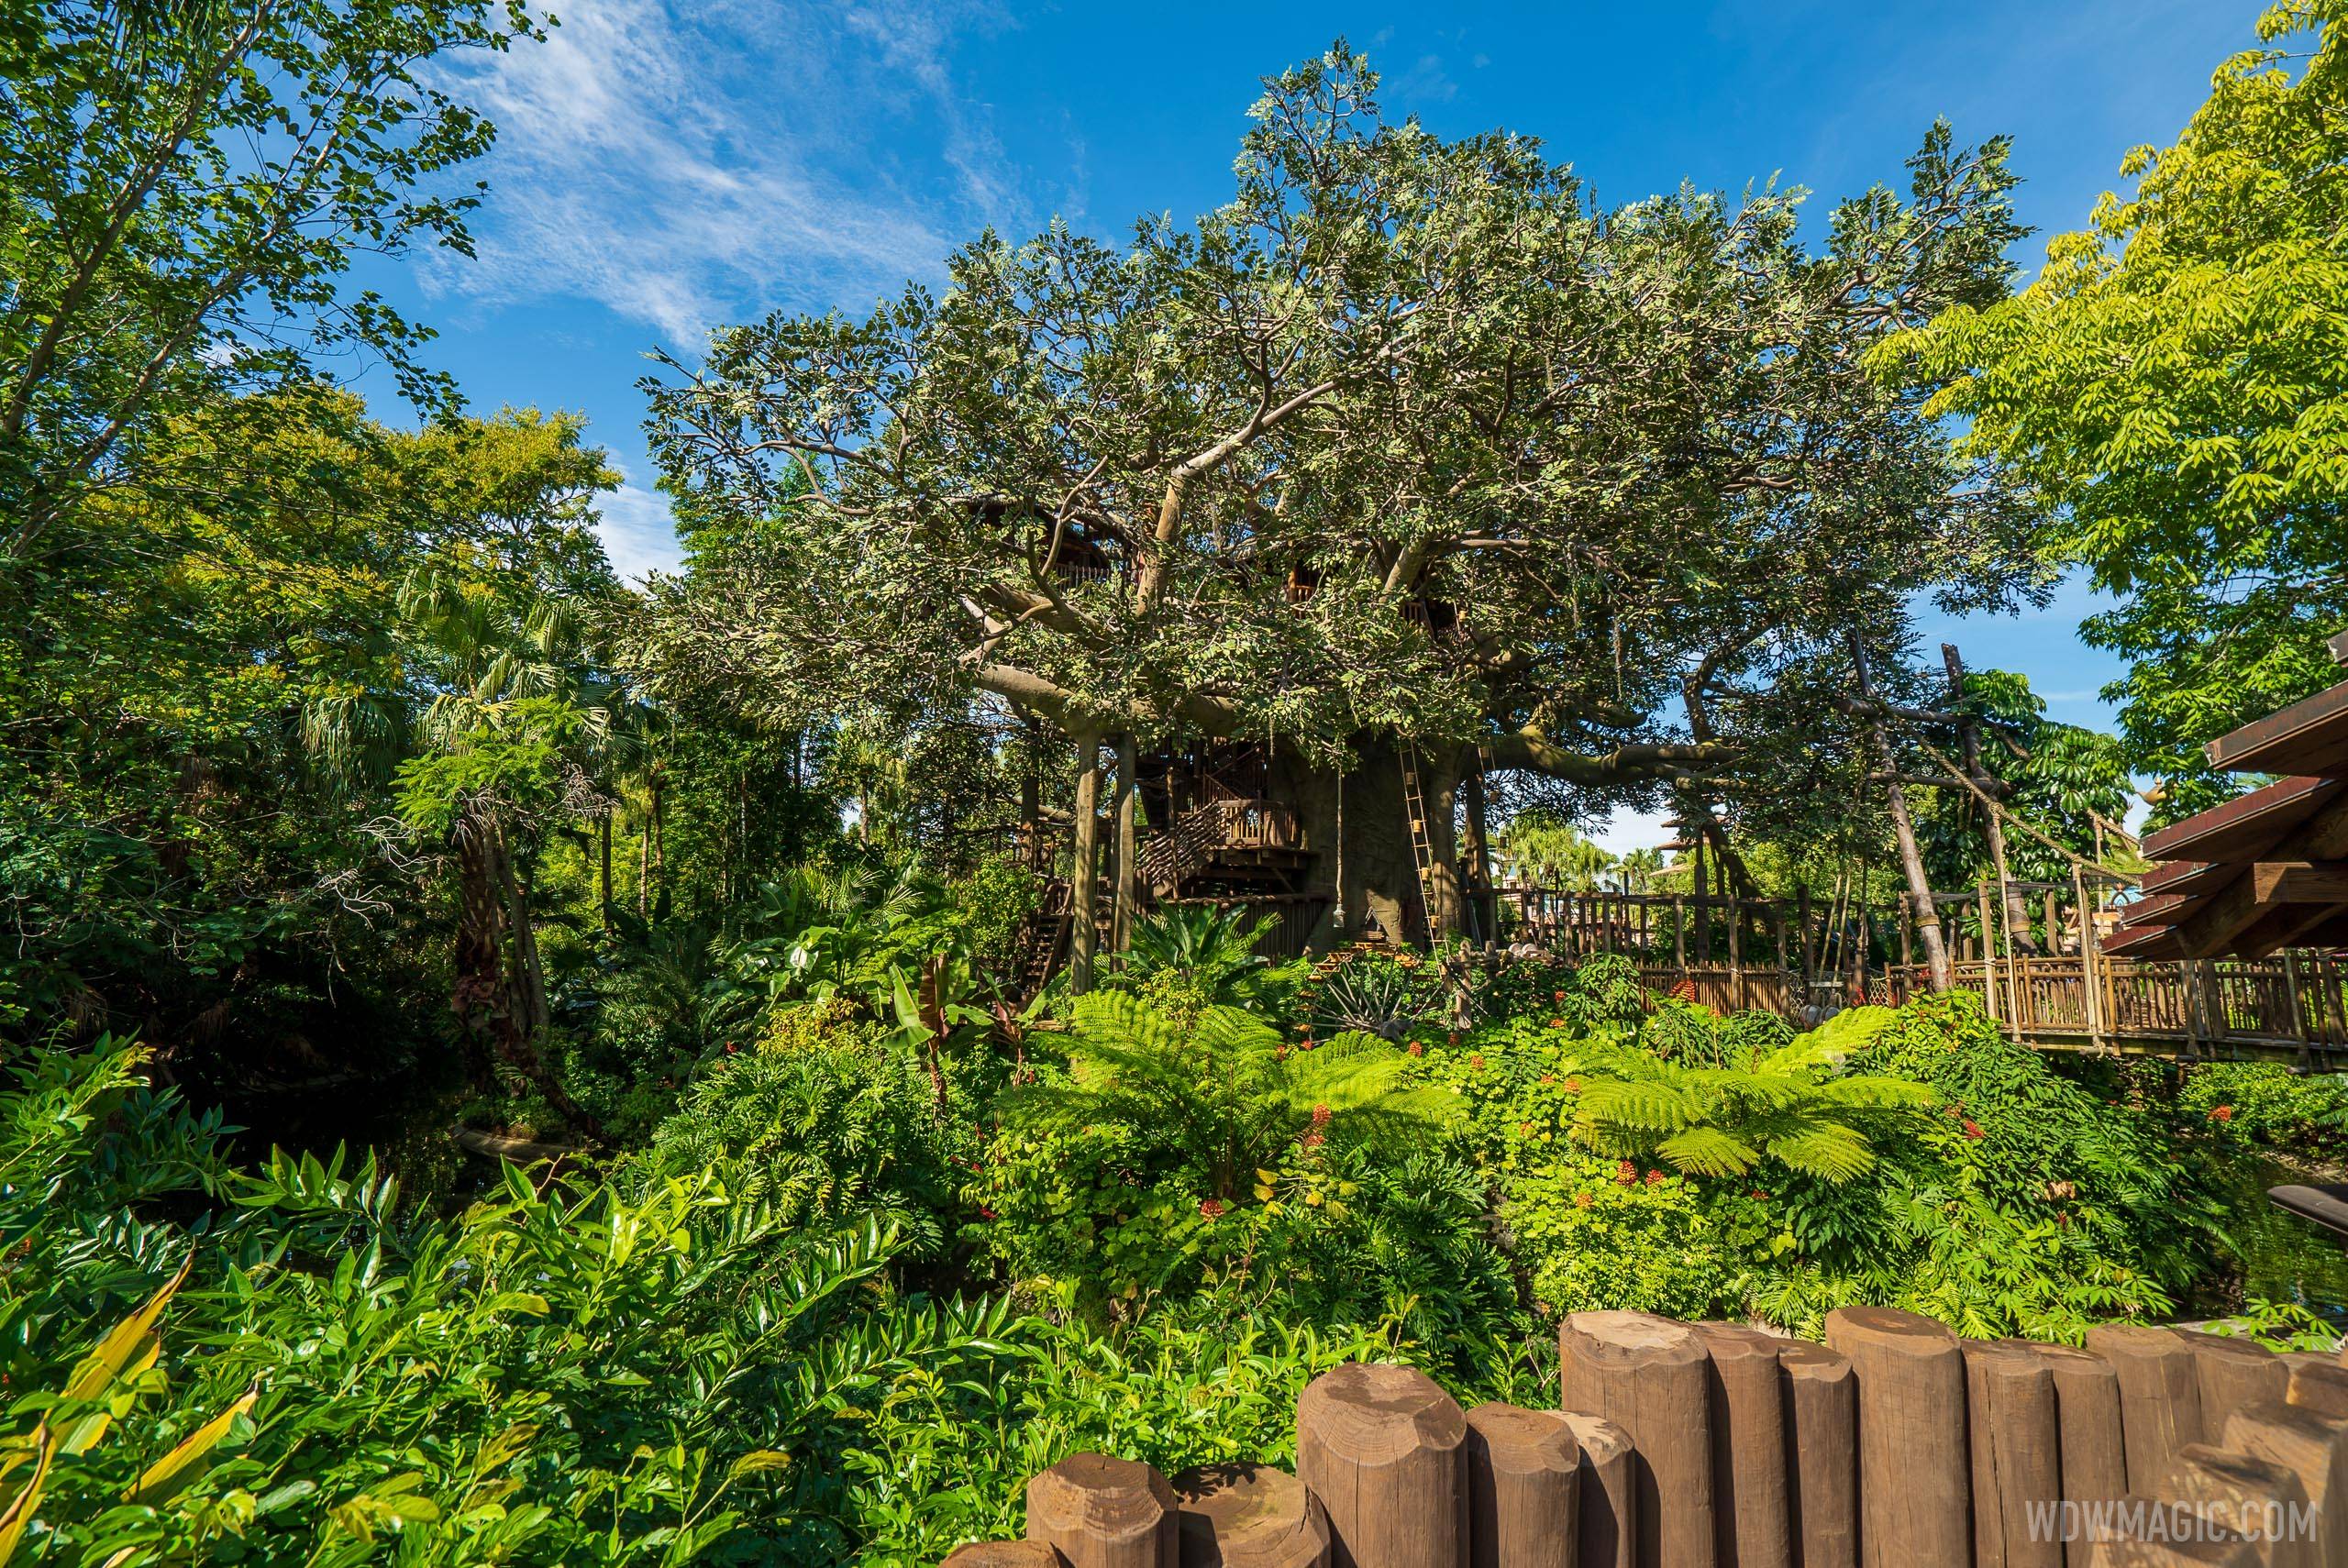 Swiss Family Treehouse closing for 2 months this summer